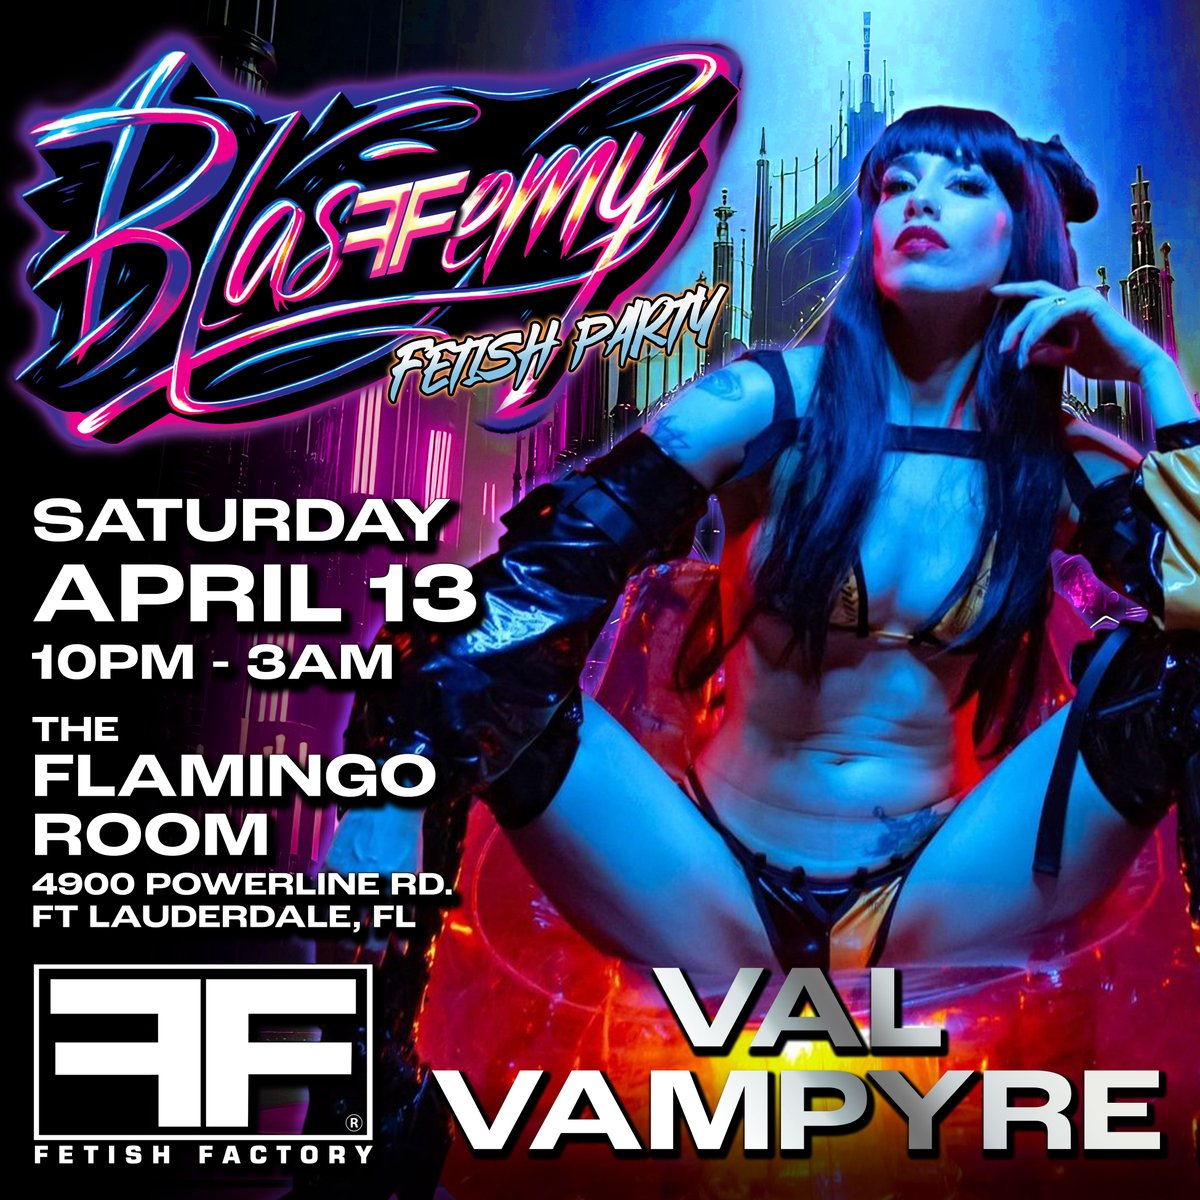 Mixing Sounds & Exploring Forbidden Desires...that's BLASFFEMY! TRANSFORM YOURSELF & transgress with our entertainers! Join us on Sat. April 13 @ the Flamingo Room in the Fort Lauderdale Grand Hotel! IG: @Valvampyre @knoxstar13 @kaylabeeofficial @lexuswicked